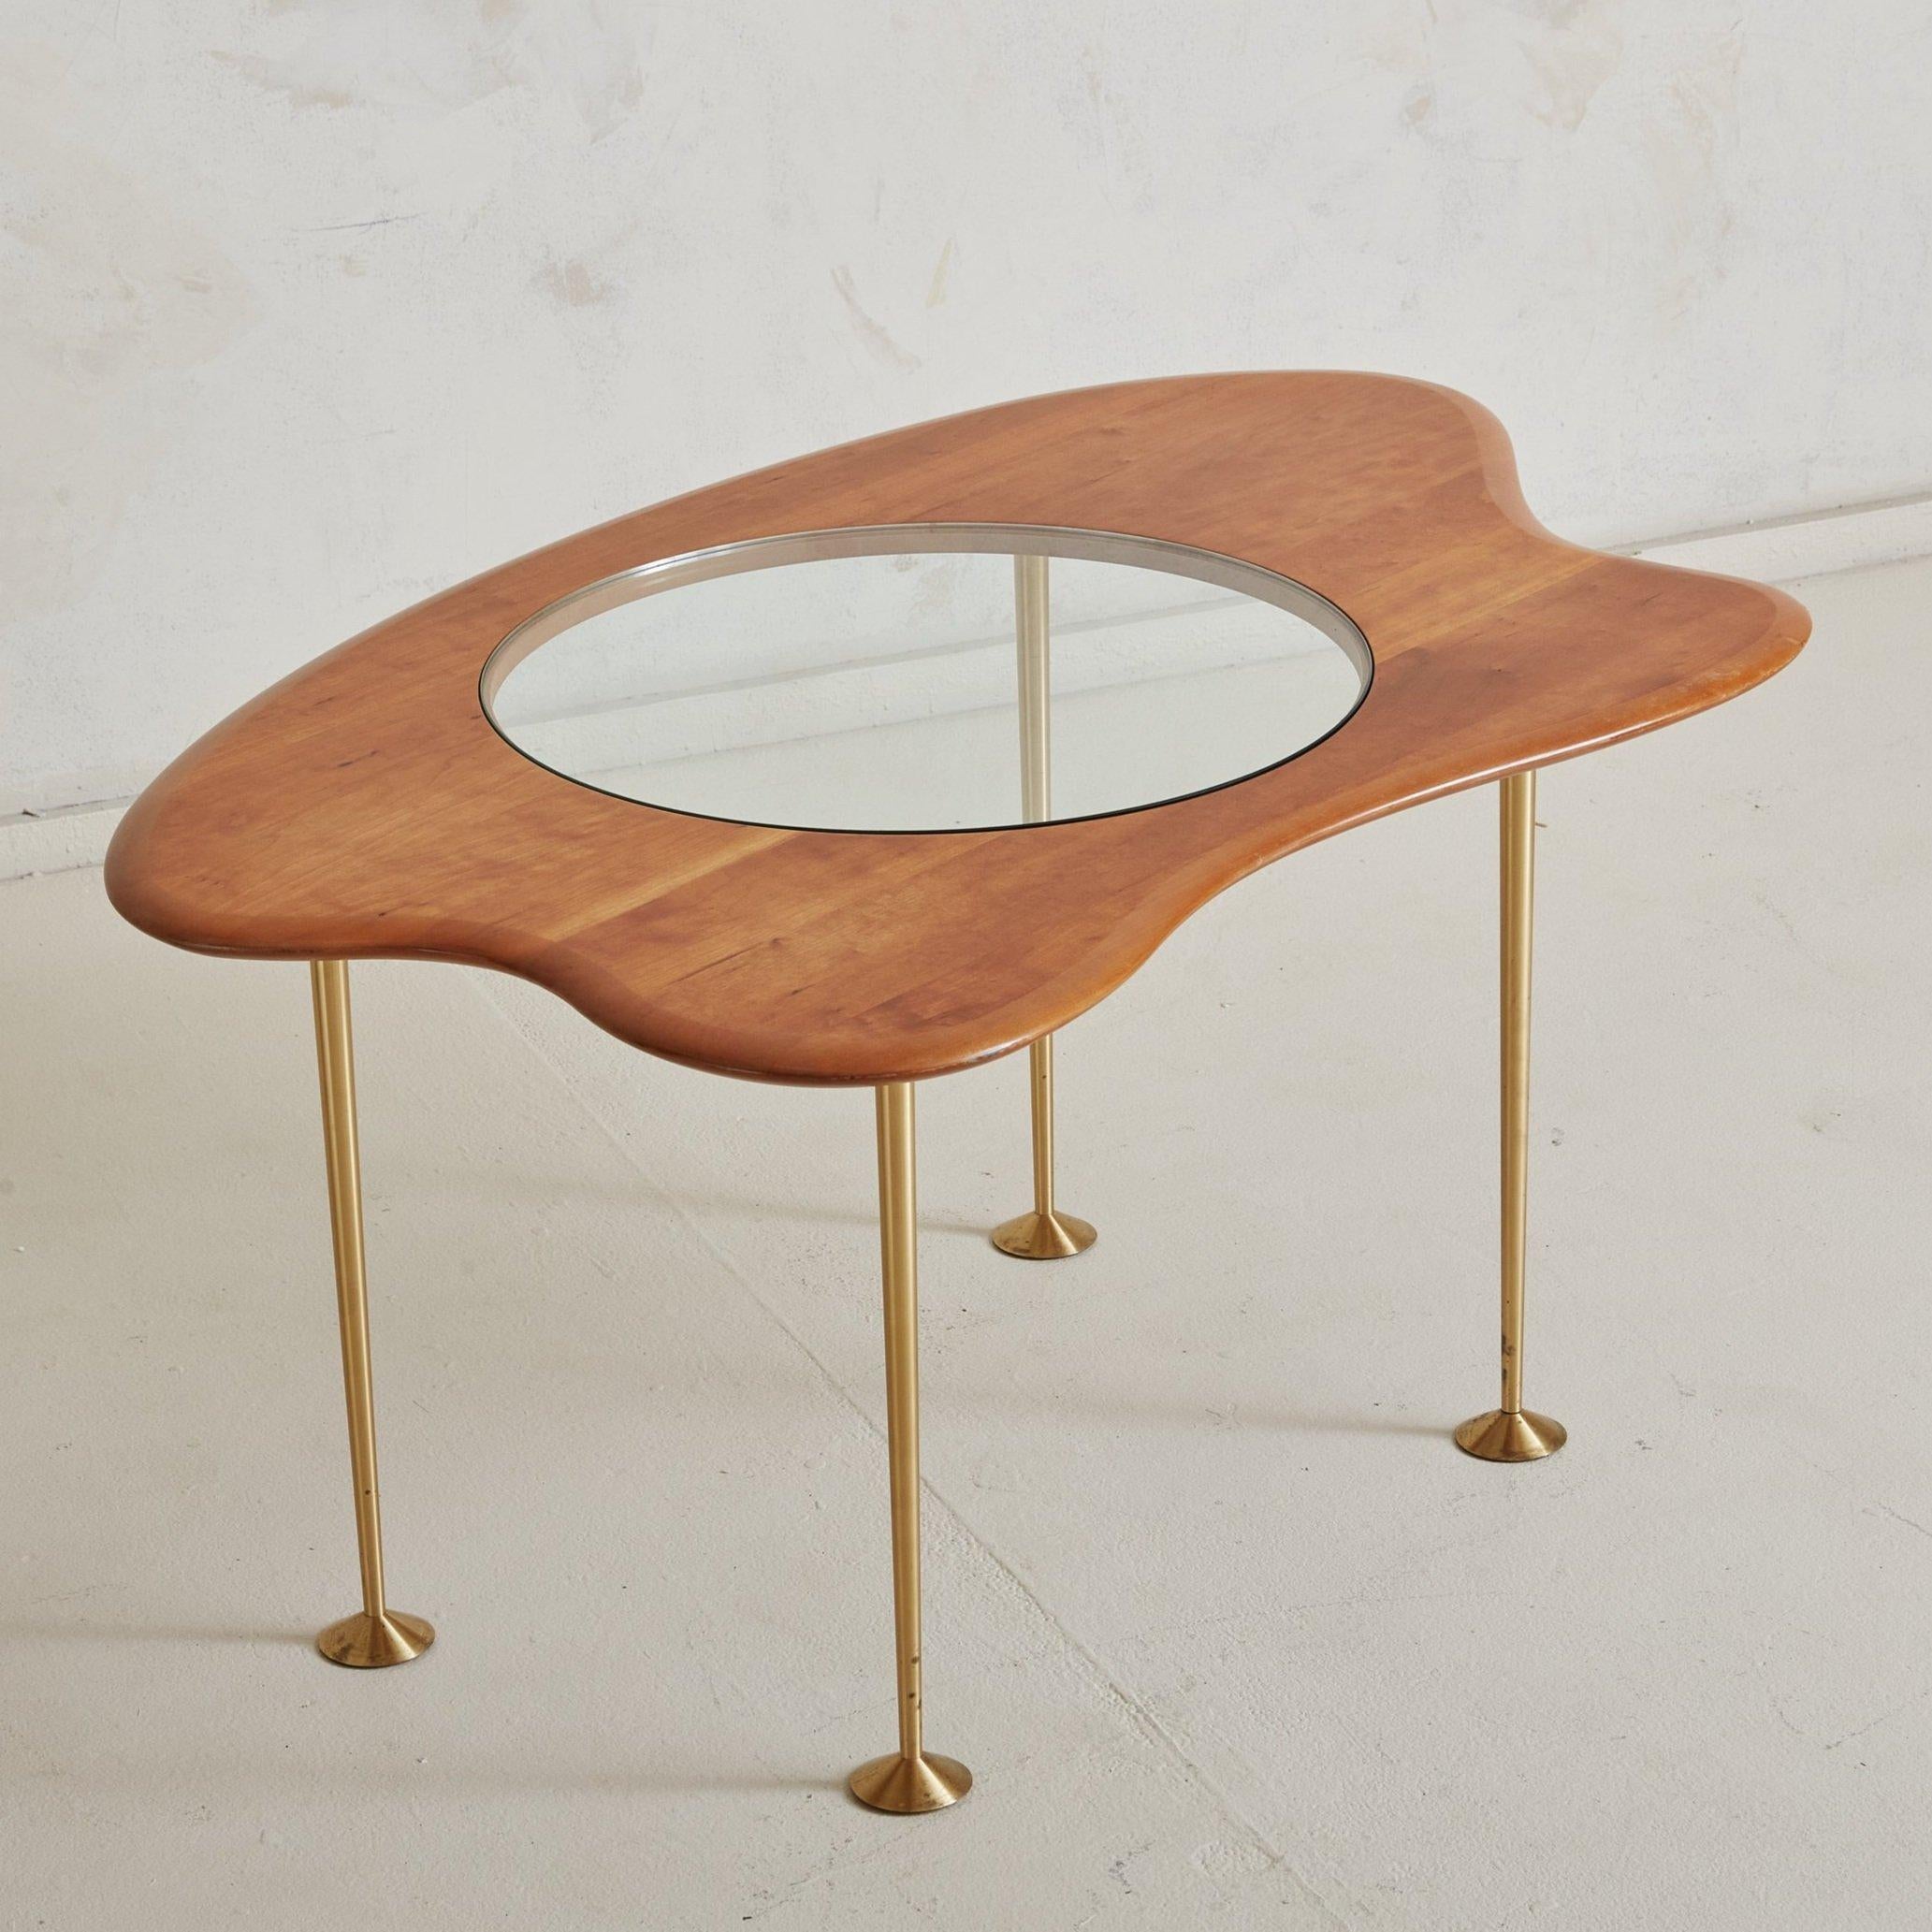 A rare Mid-Century Modern cherry wood, glass and brass coffee table. This coffee table features a stunning oblong shaped cherry wood top with horizontal graining and a seamlessly inset sheet of round transparent glass. Four minimalistic tapered